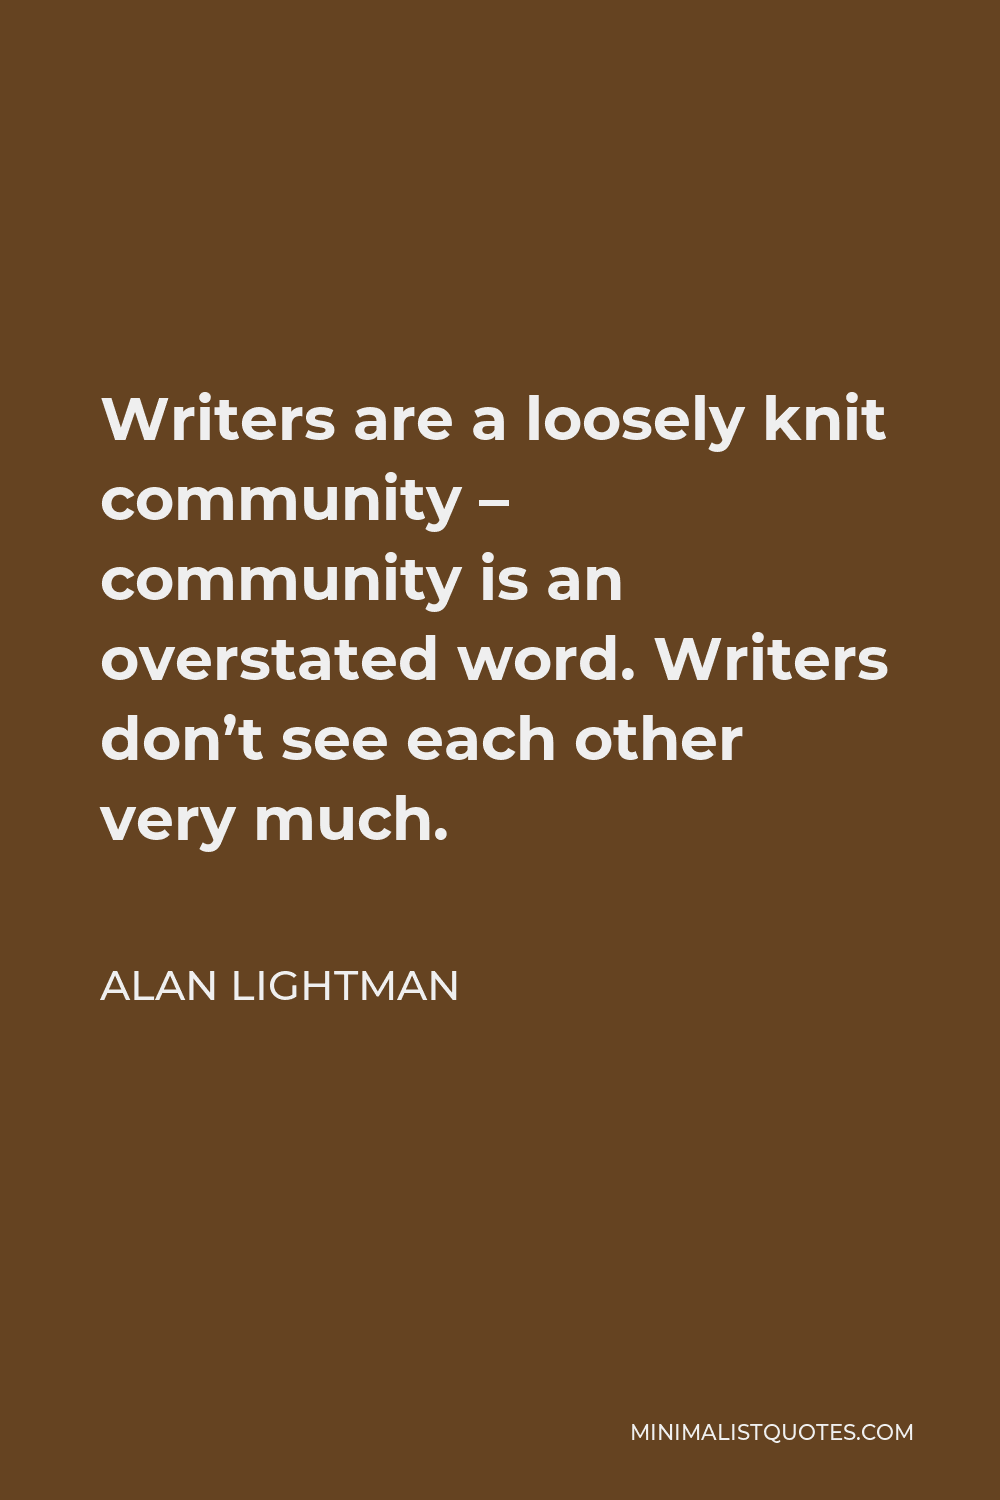 Alan Lightman Quote - Writers are a loosely knit community – community is an overstated word. Writers don’t see each other very much.